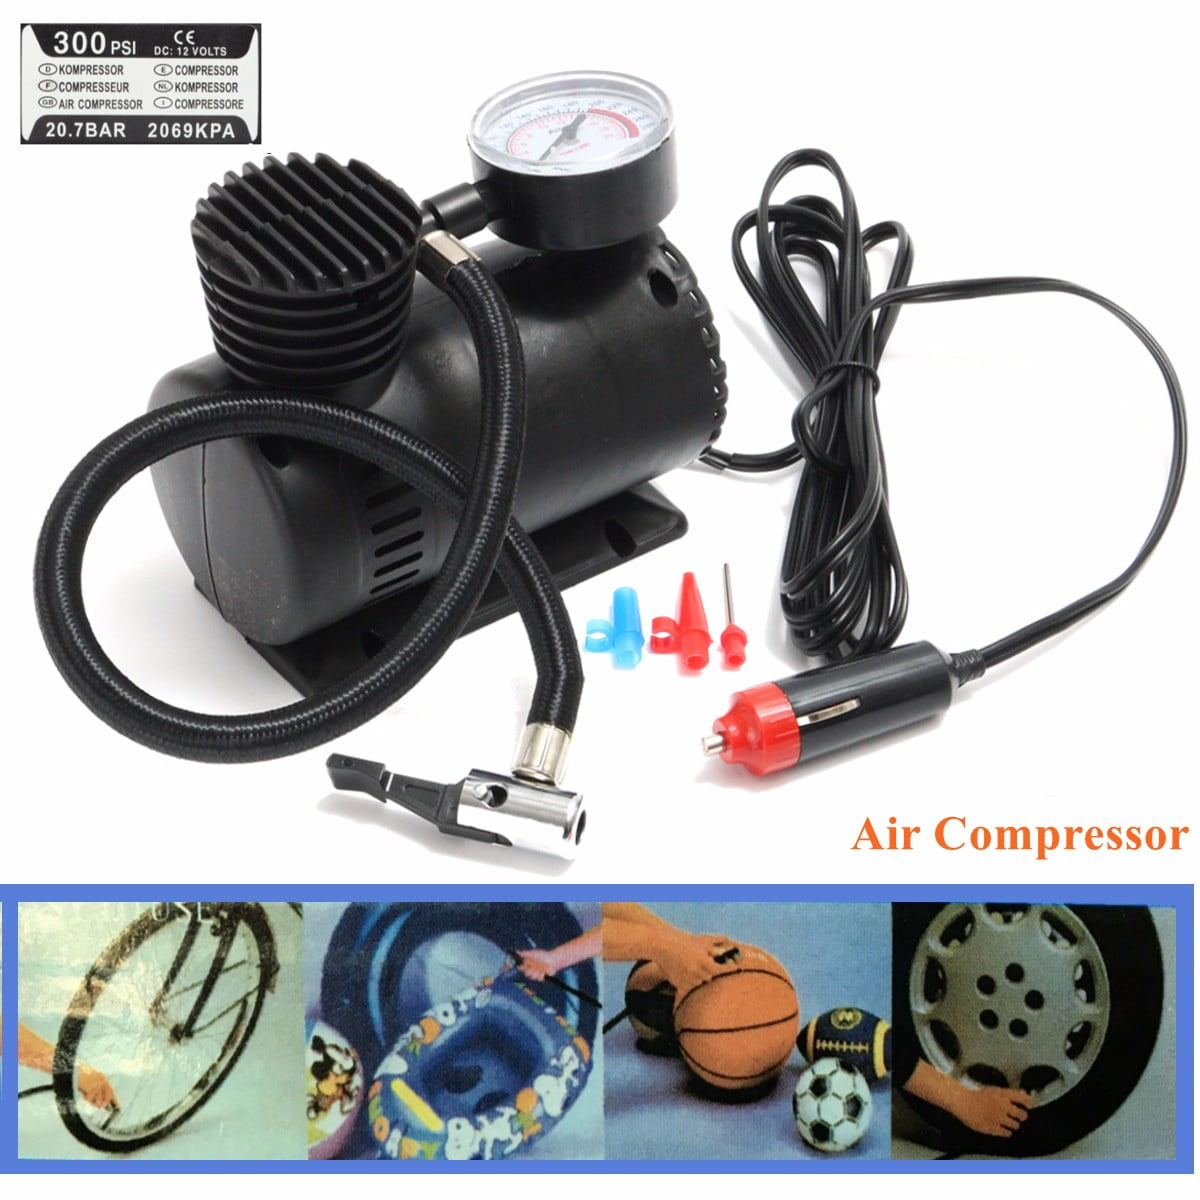 L-DiscountStore 12v Air Compressor Motorbike Hand Held Pump Portable Air Pump with Pressure Gauge Battery for Basketball Electric Tire Inflator Cars 